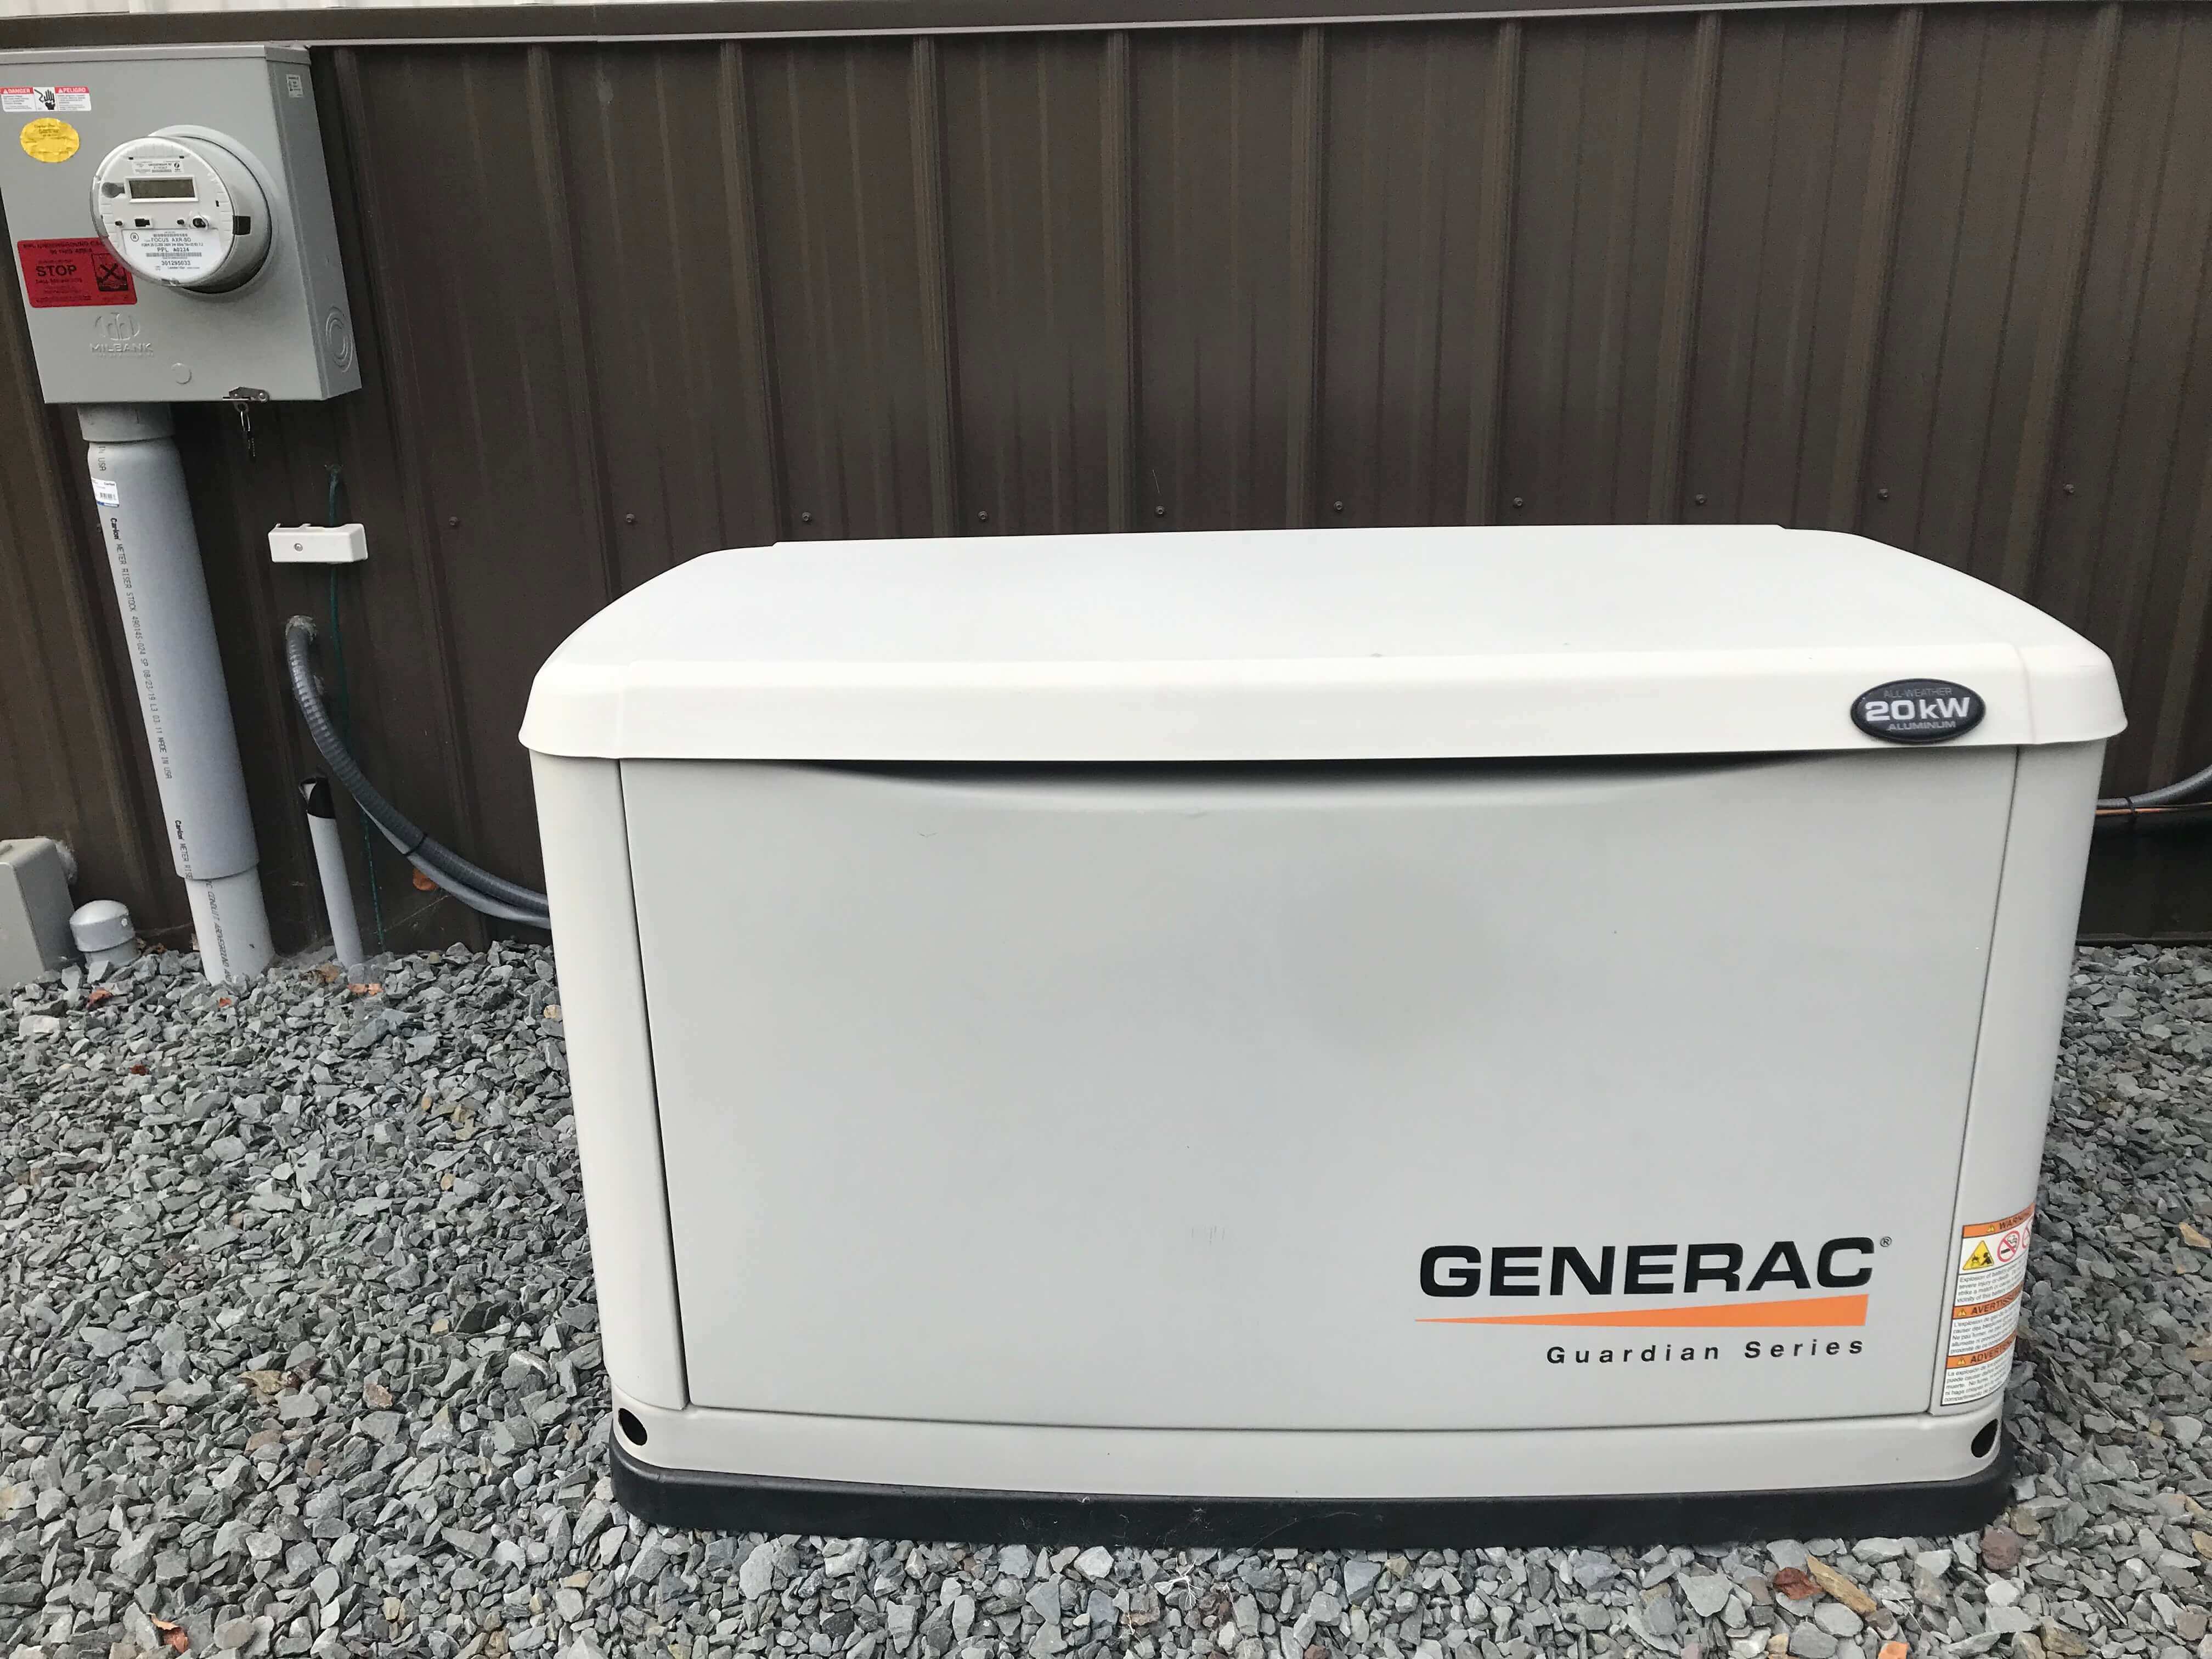 Installed Generac generator at commercial property